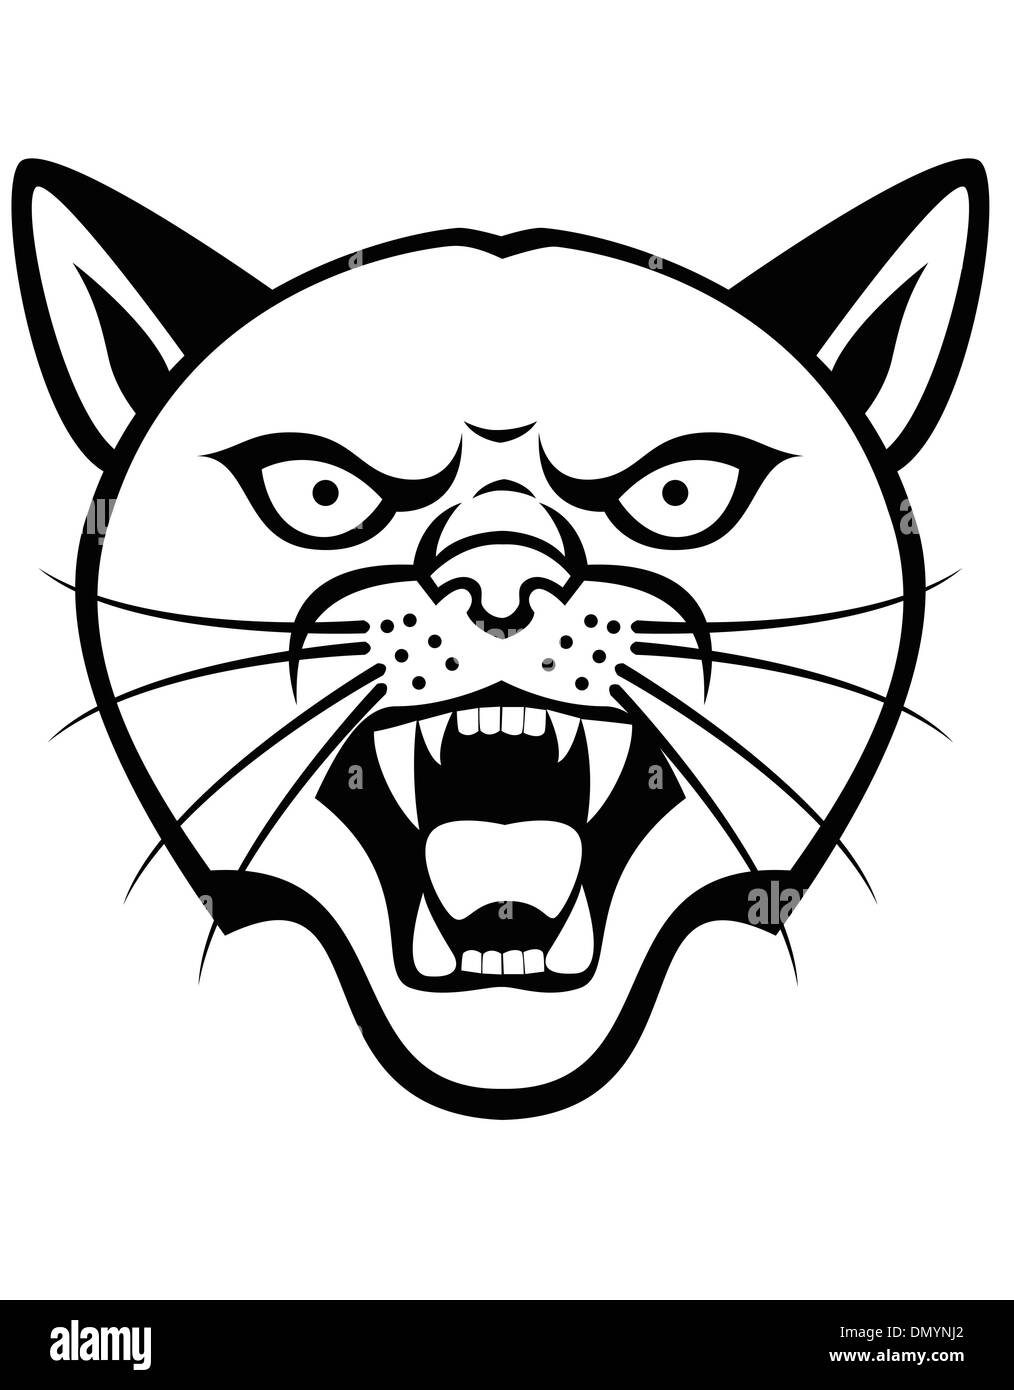 Panther head tattoo Stock Vector